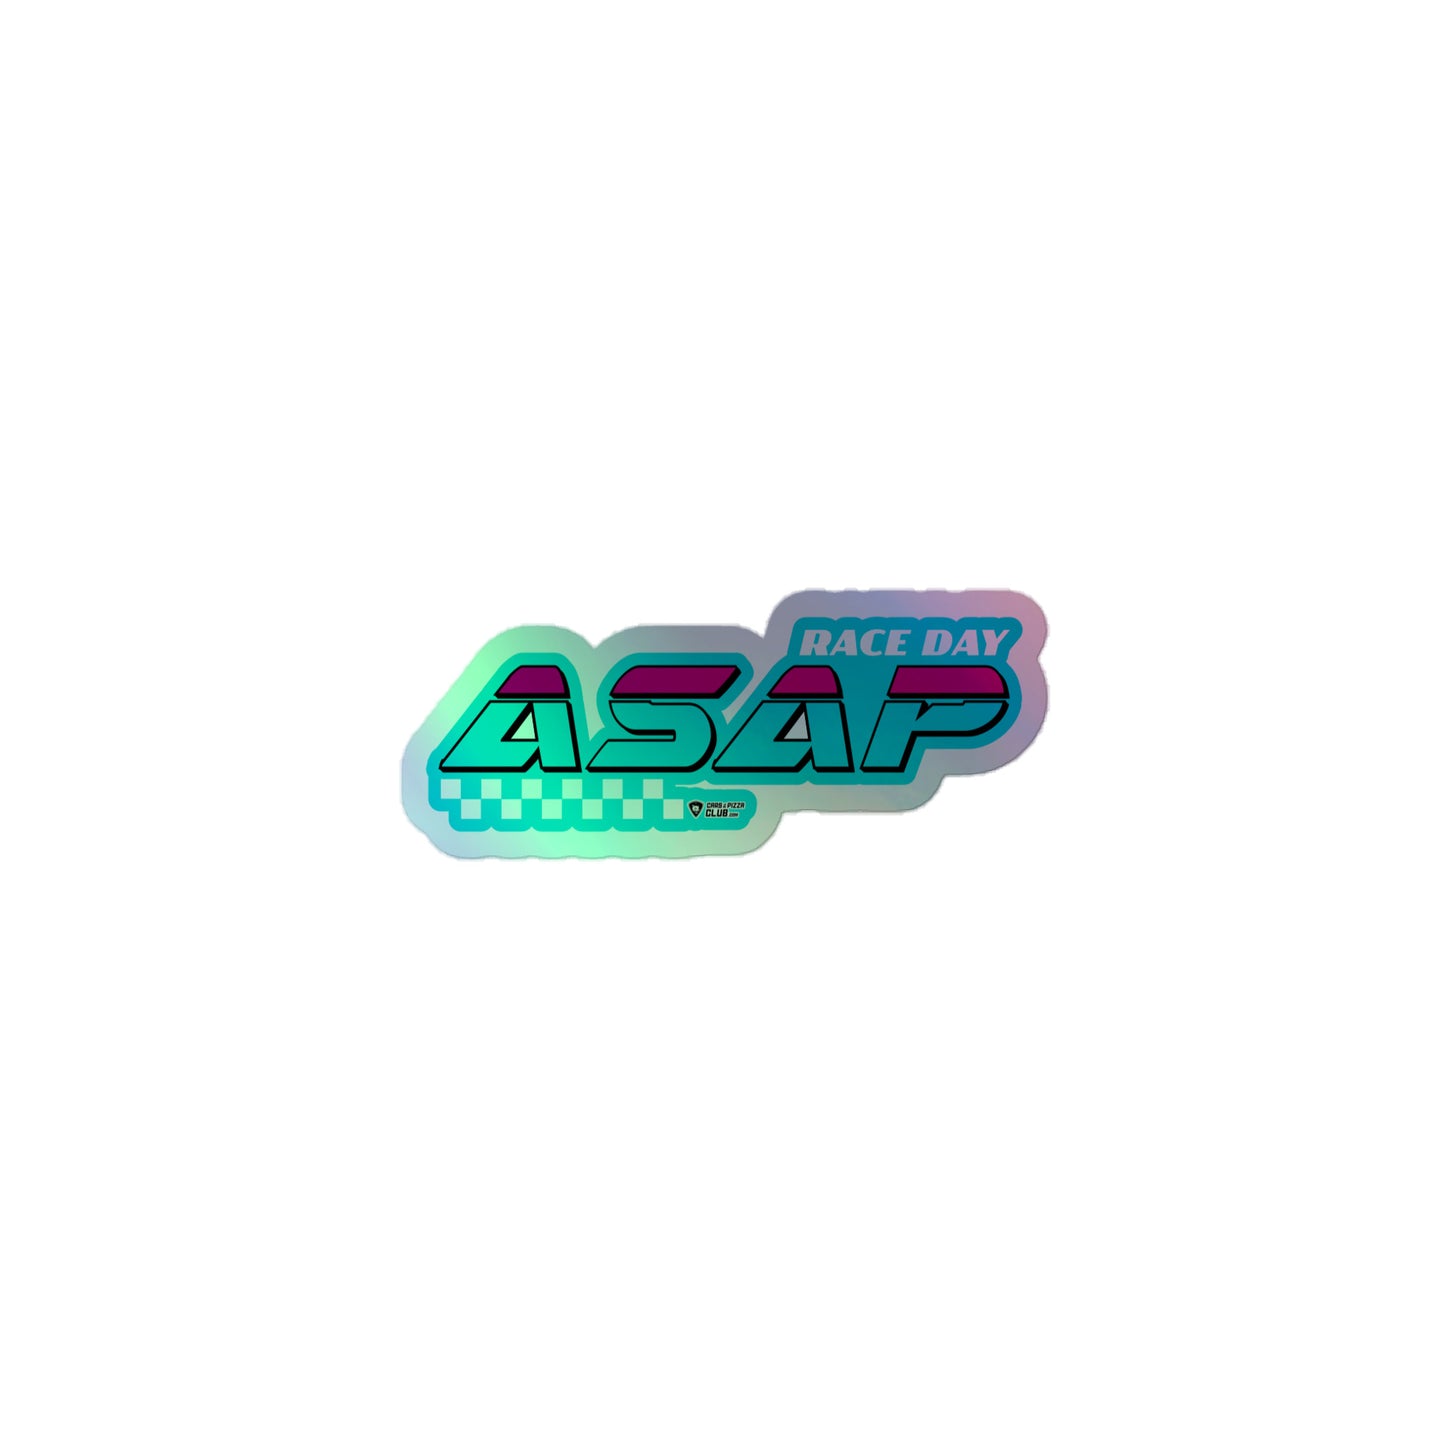 Holographic Die Cut Stickers "Race Day ASAP" Blue